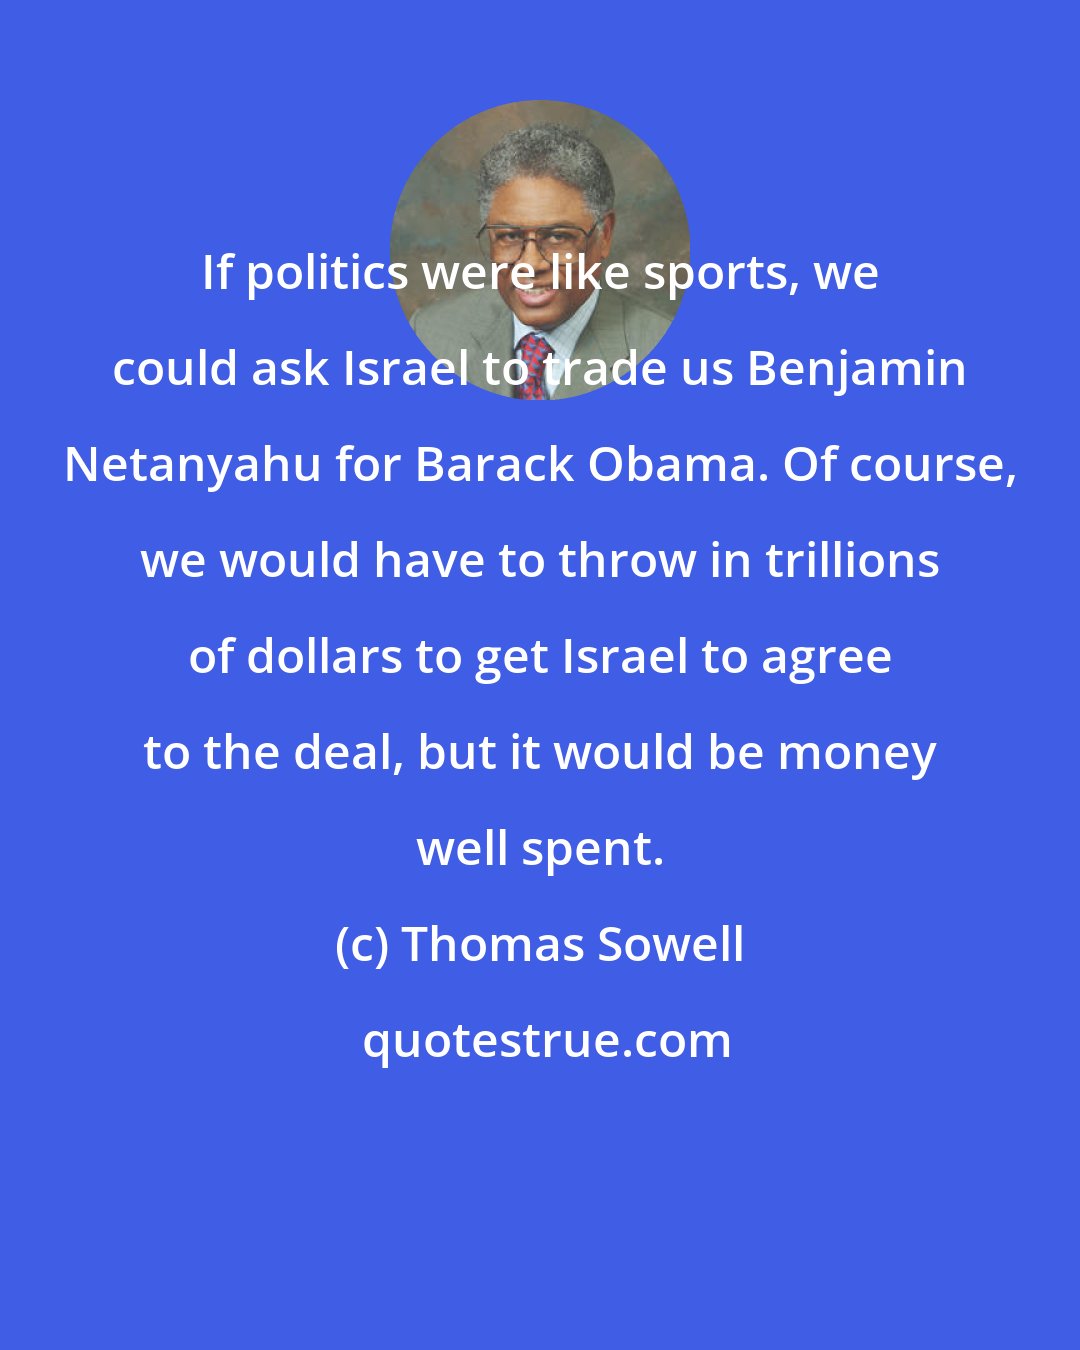 Thomas Sowell: If politics were like sports, we could ask Israel to trade us Benjamin Netanyahu for Barack Obama. Of course, we would have to throw in trillions of dollars to get Israel to agree to the deal, but it would be money well spent.